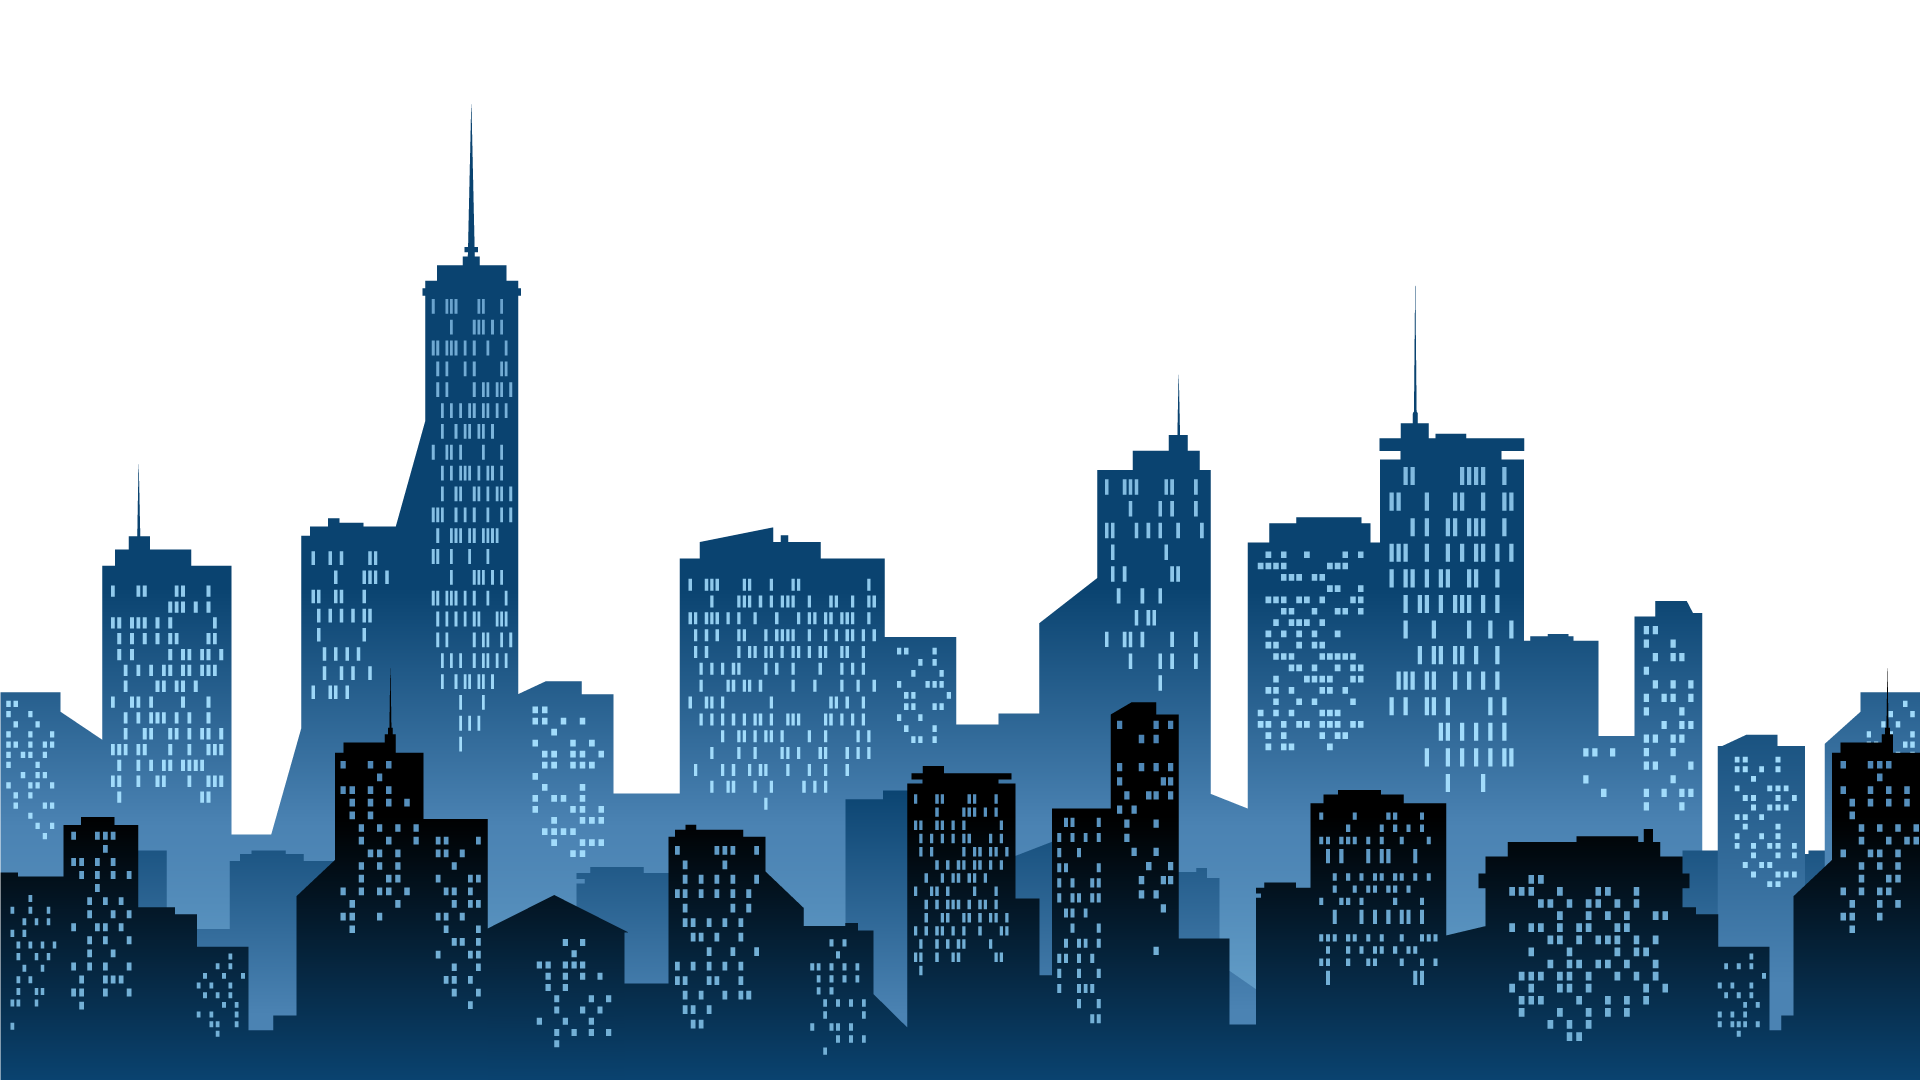 Cities Skylines Silhouette Clip Art Modern City Png Download 1920